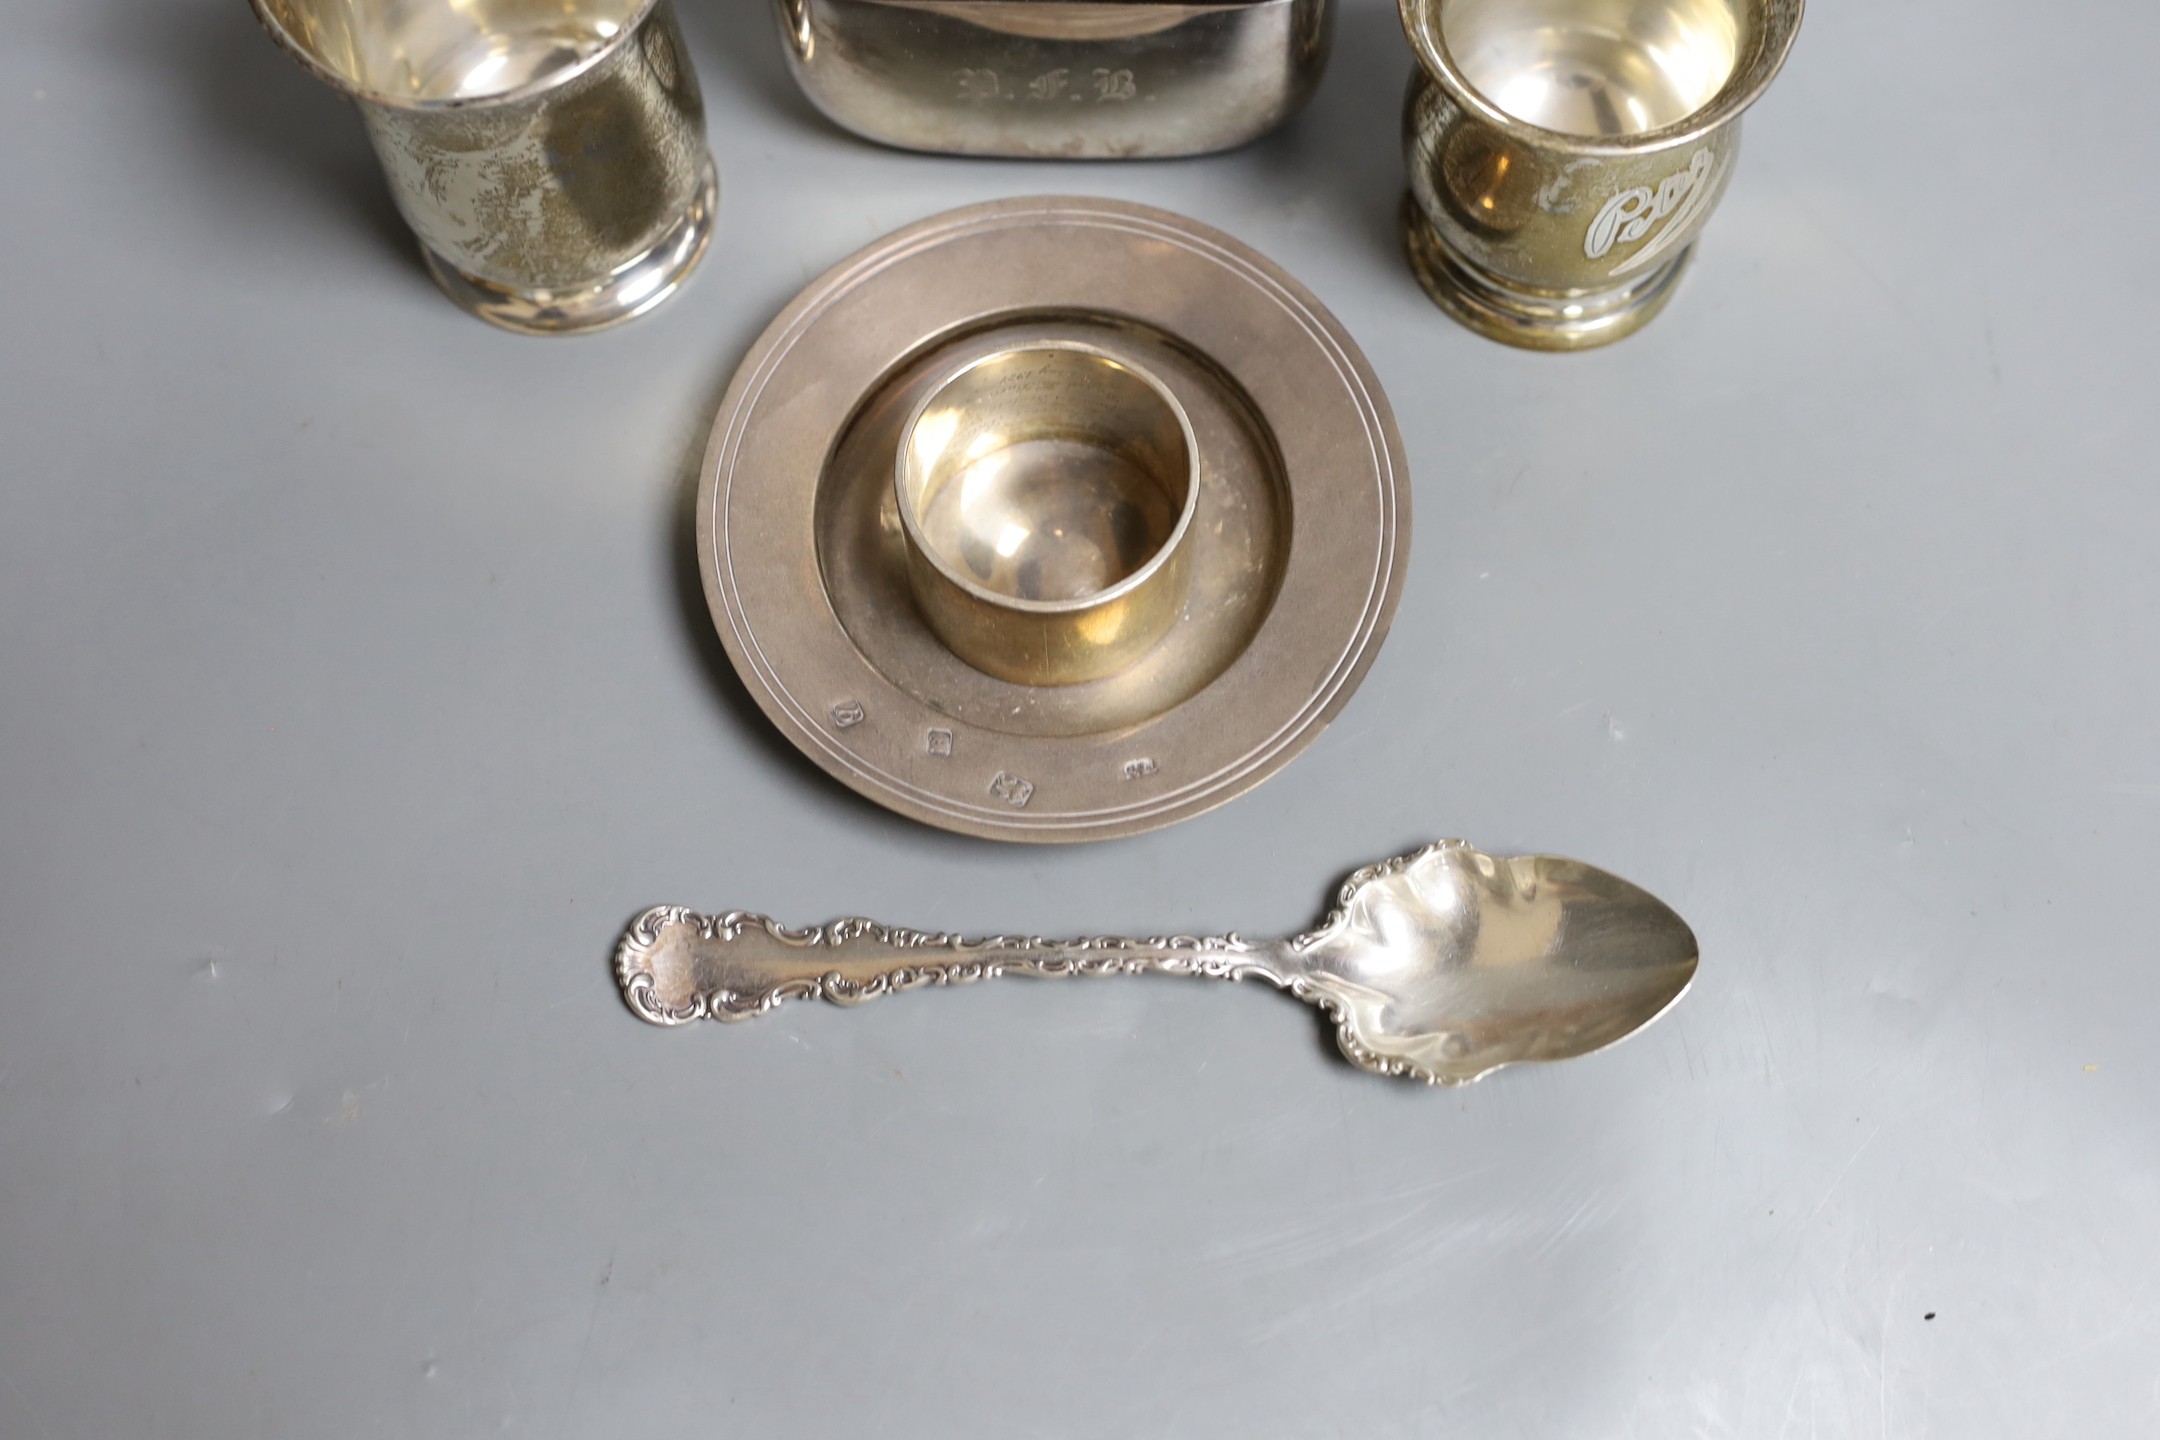 Two small George V christening mugs, a small modern silver armada dish, a silver napkin ring, ornate silver spoon and a silver plate and leather mounted glass hip flask.